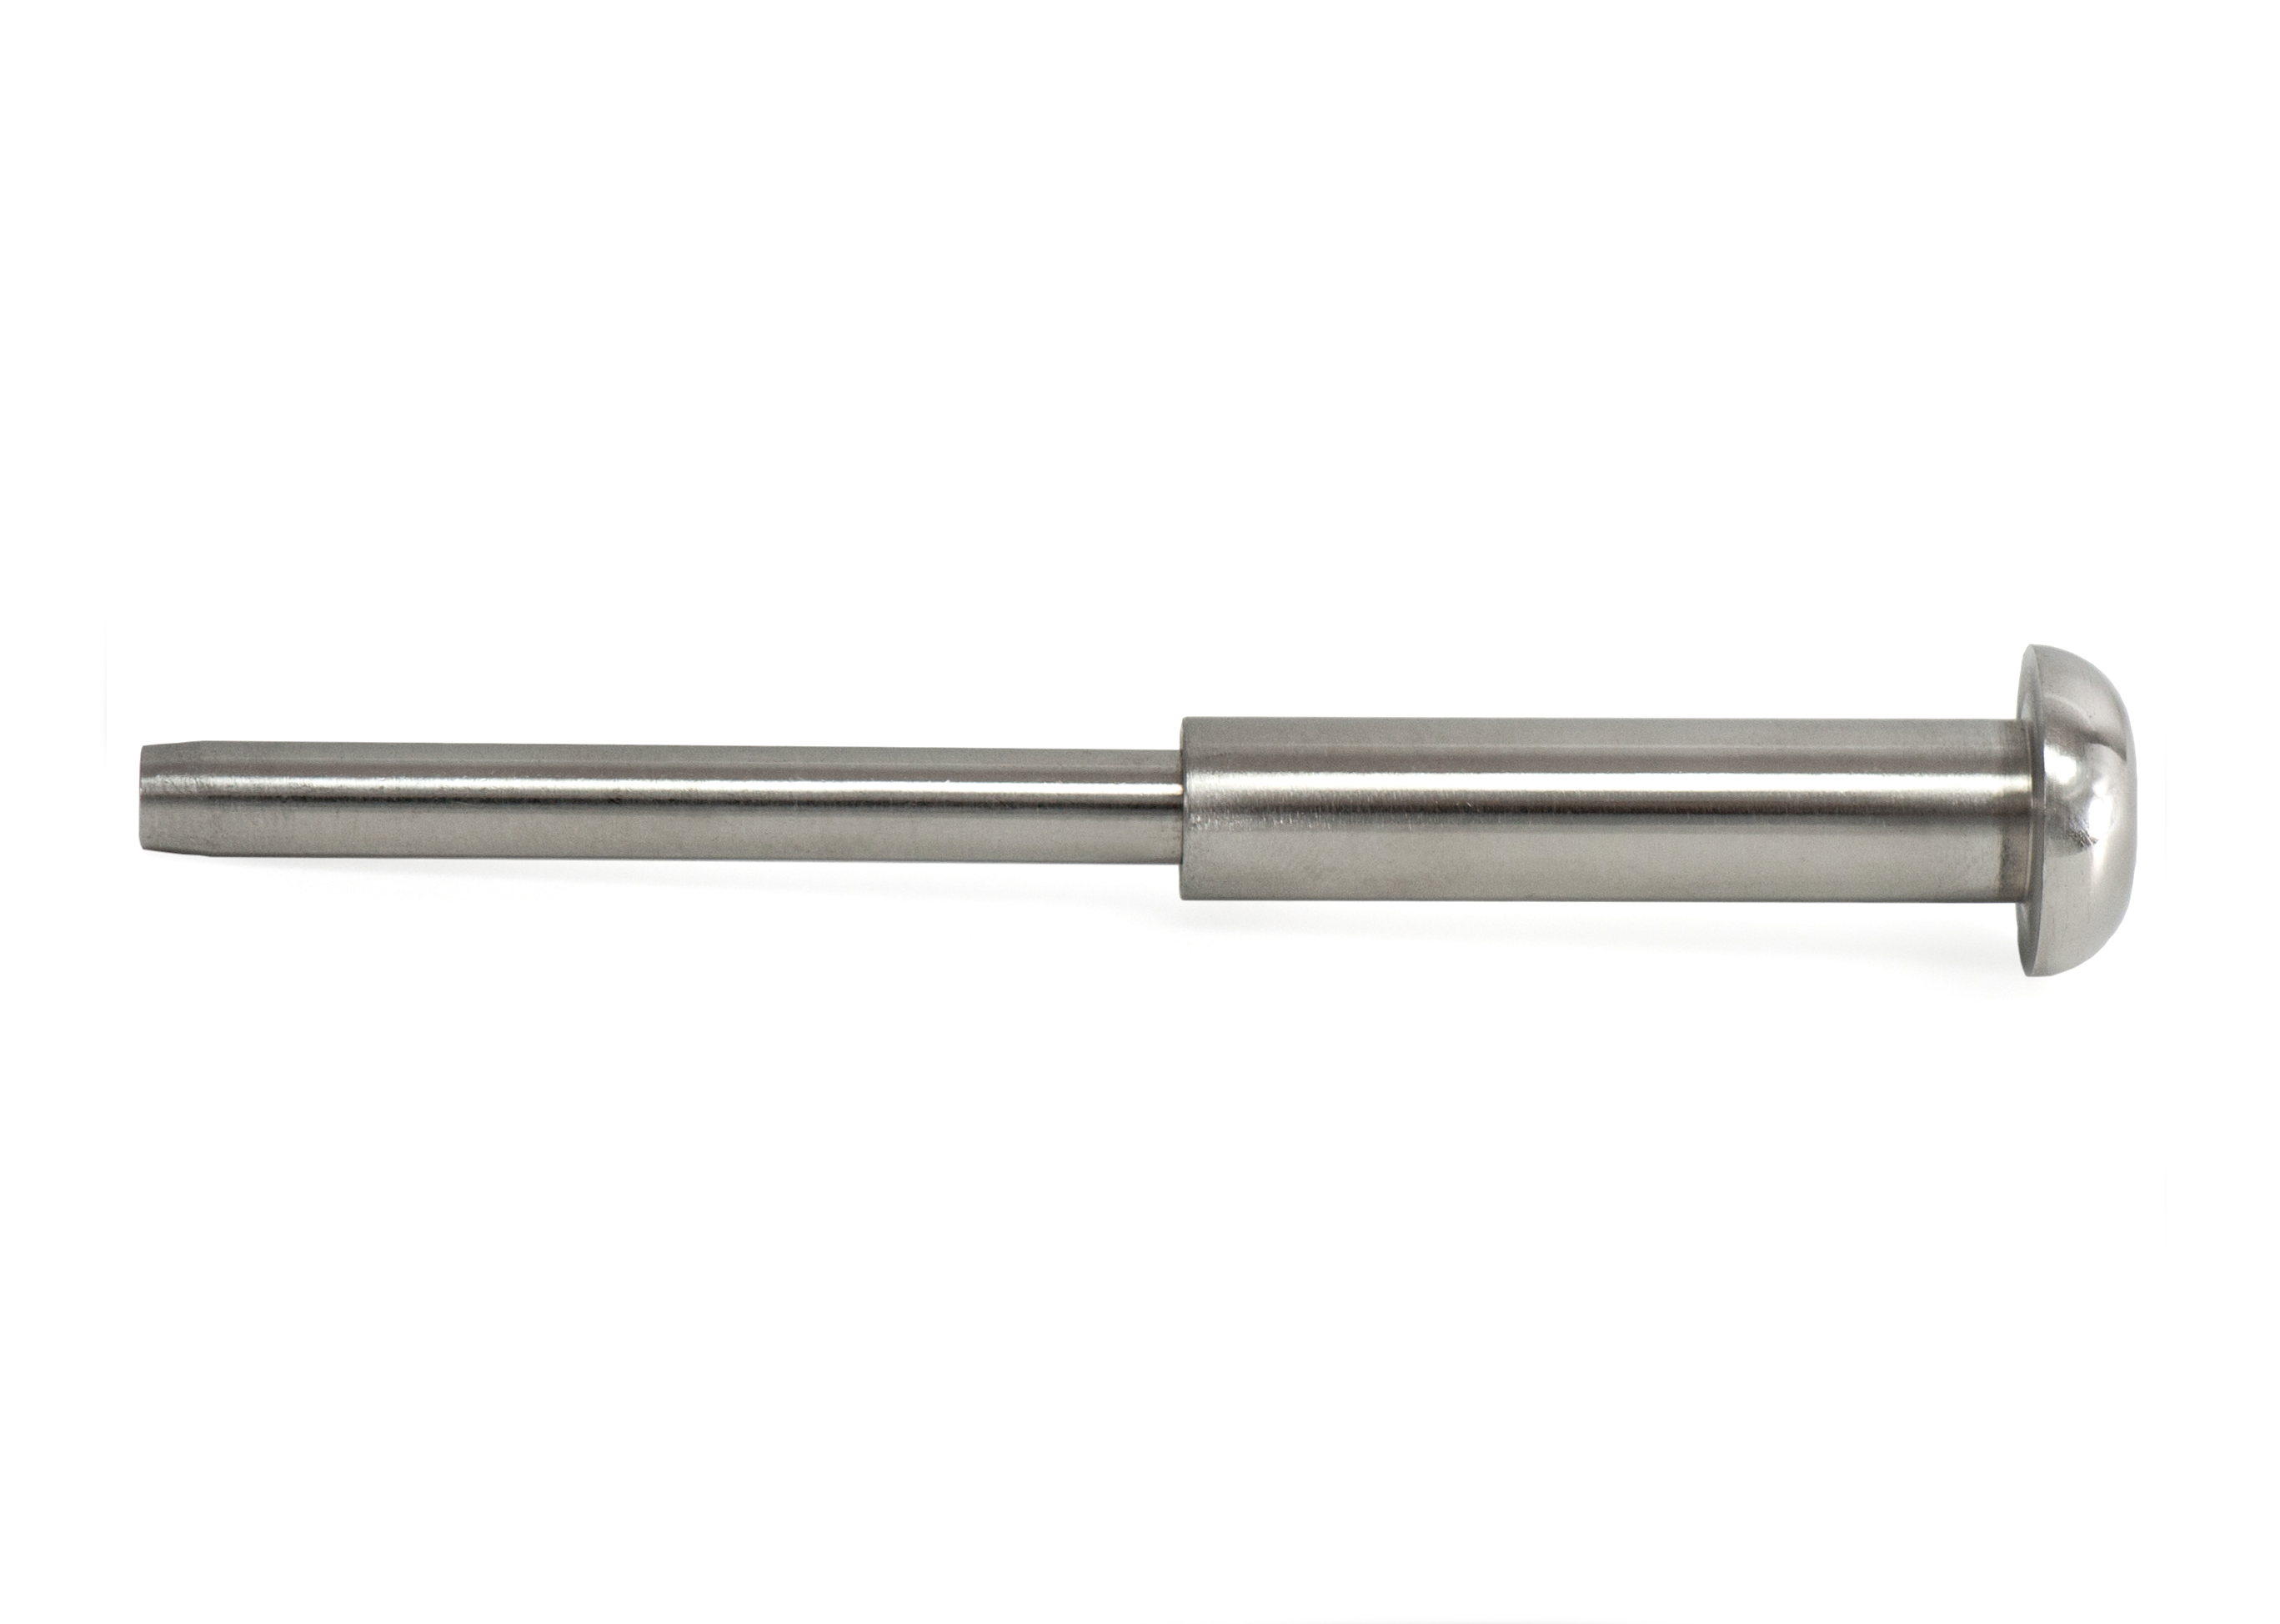 A316 Stainless Steel Barrel Nut Assembly